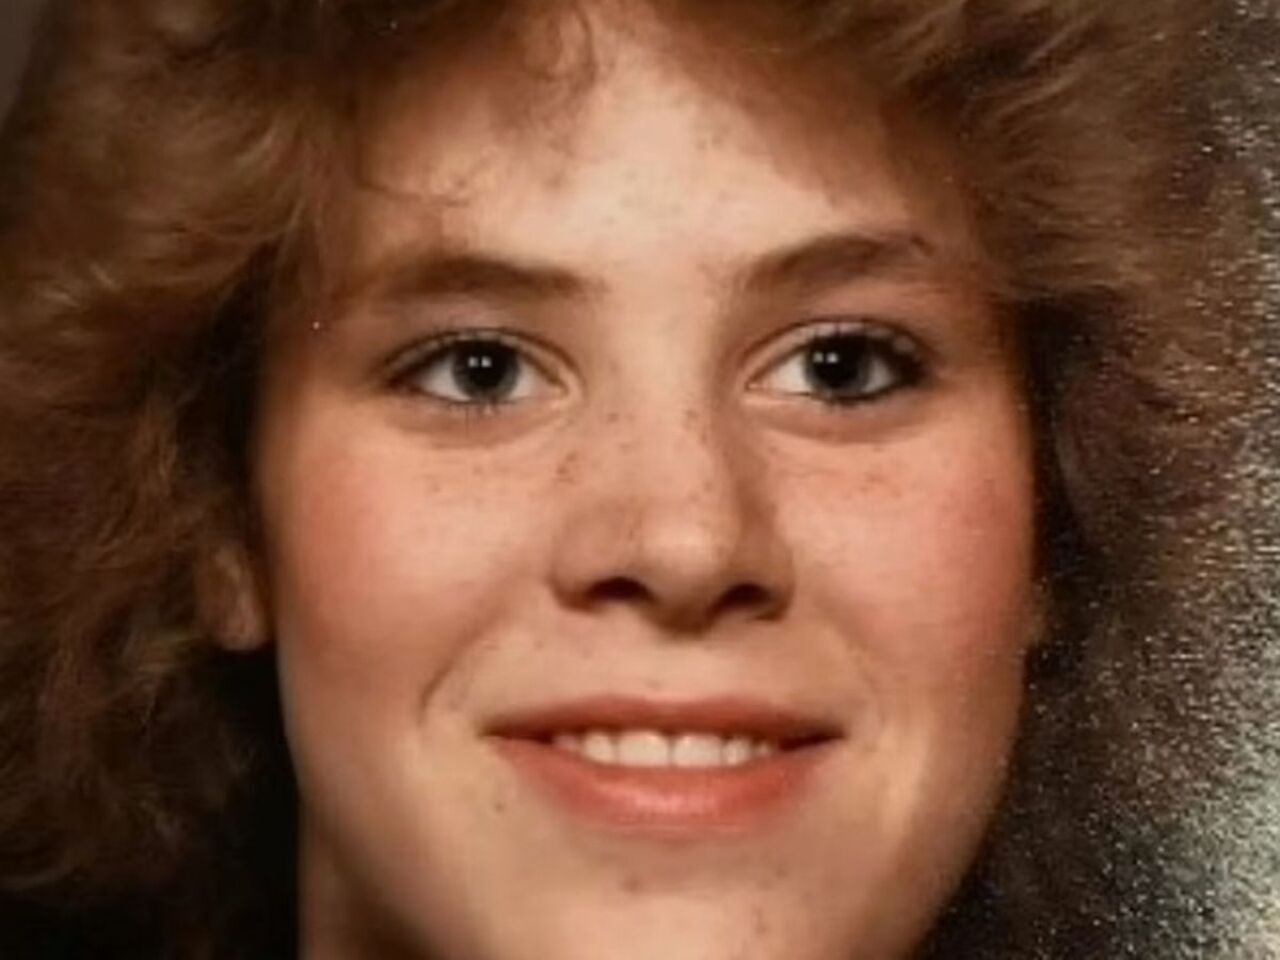 [IMAGE] Green River serial killer victim identified after 40 years as runaway girl, 15